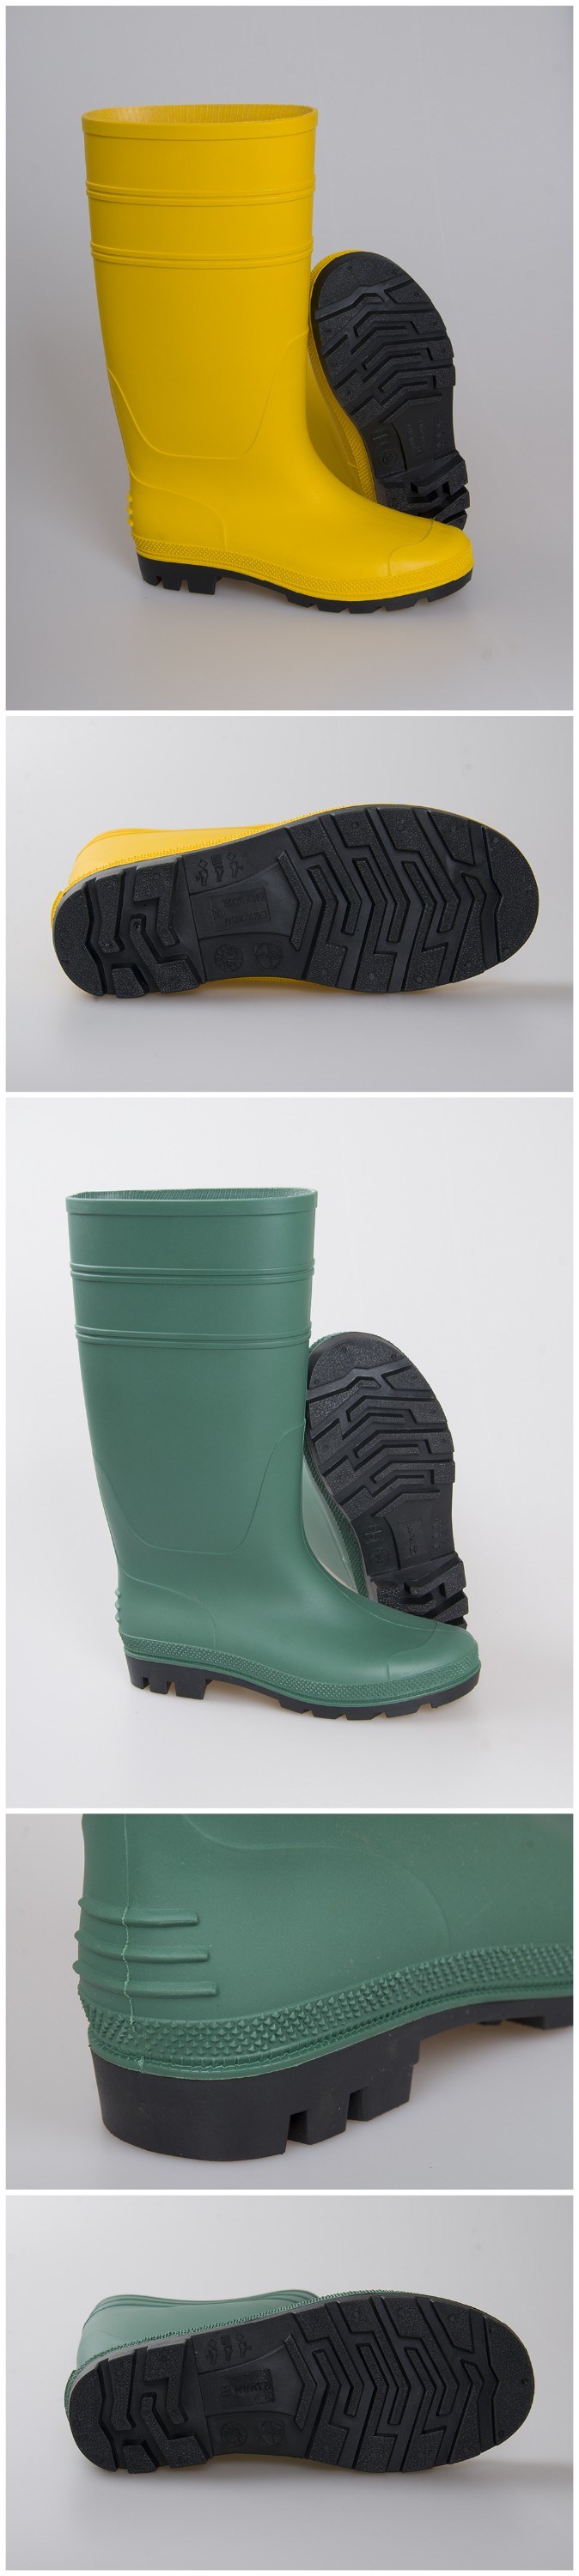 Hot Sale Gumboots, Industrial Rubber Boots, PVC Safety Rain Boots